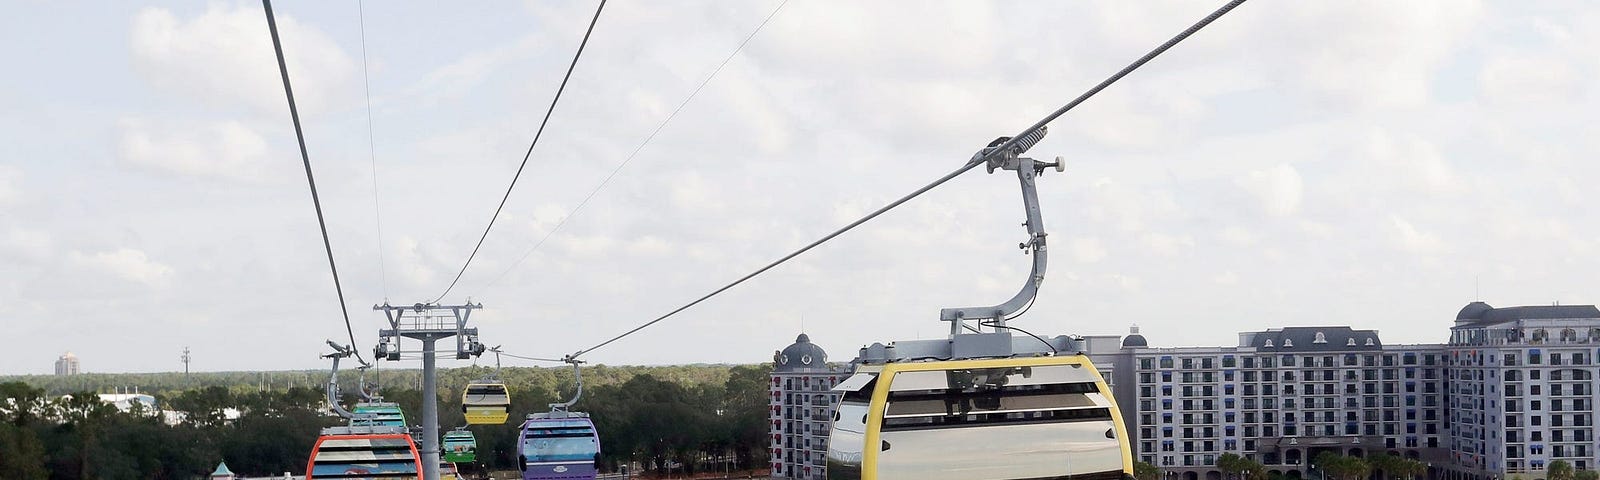 The Skyliner cable cars at Disney World.